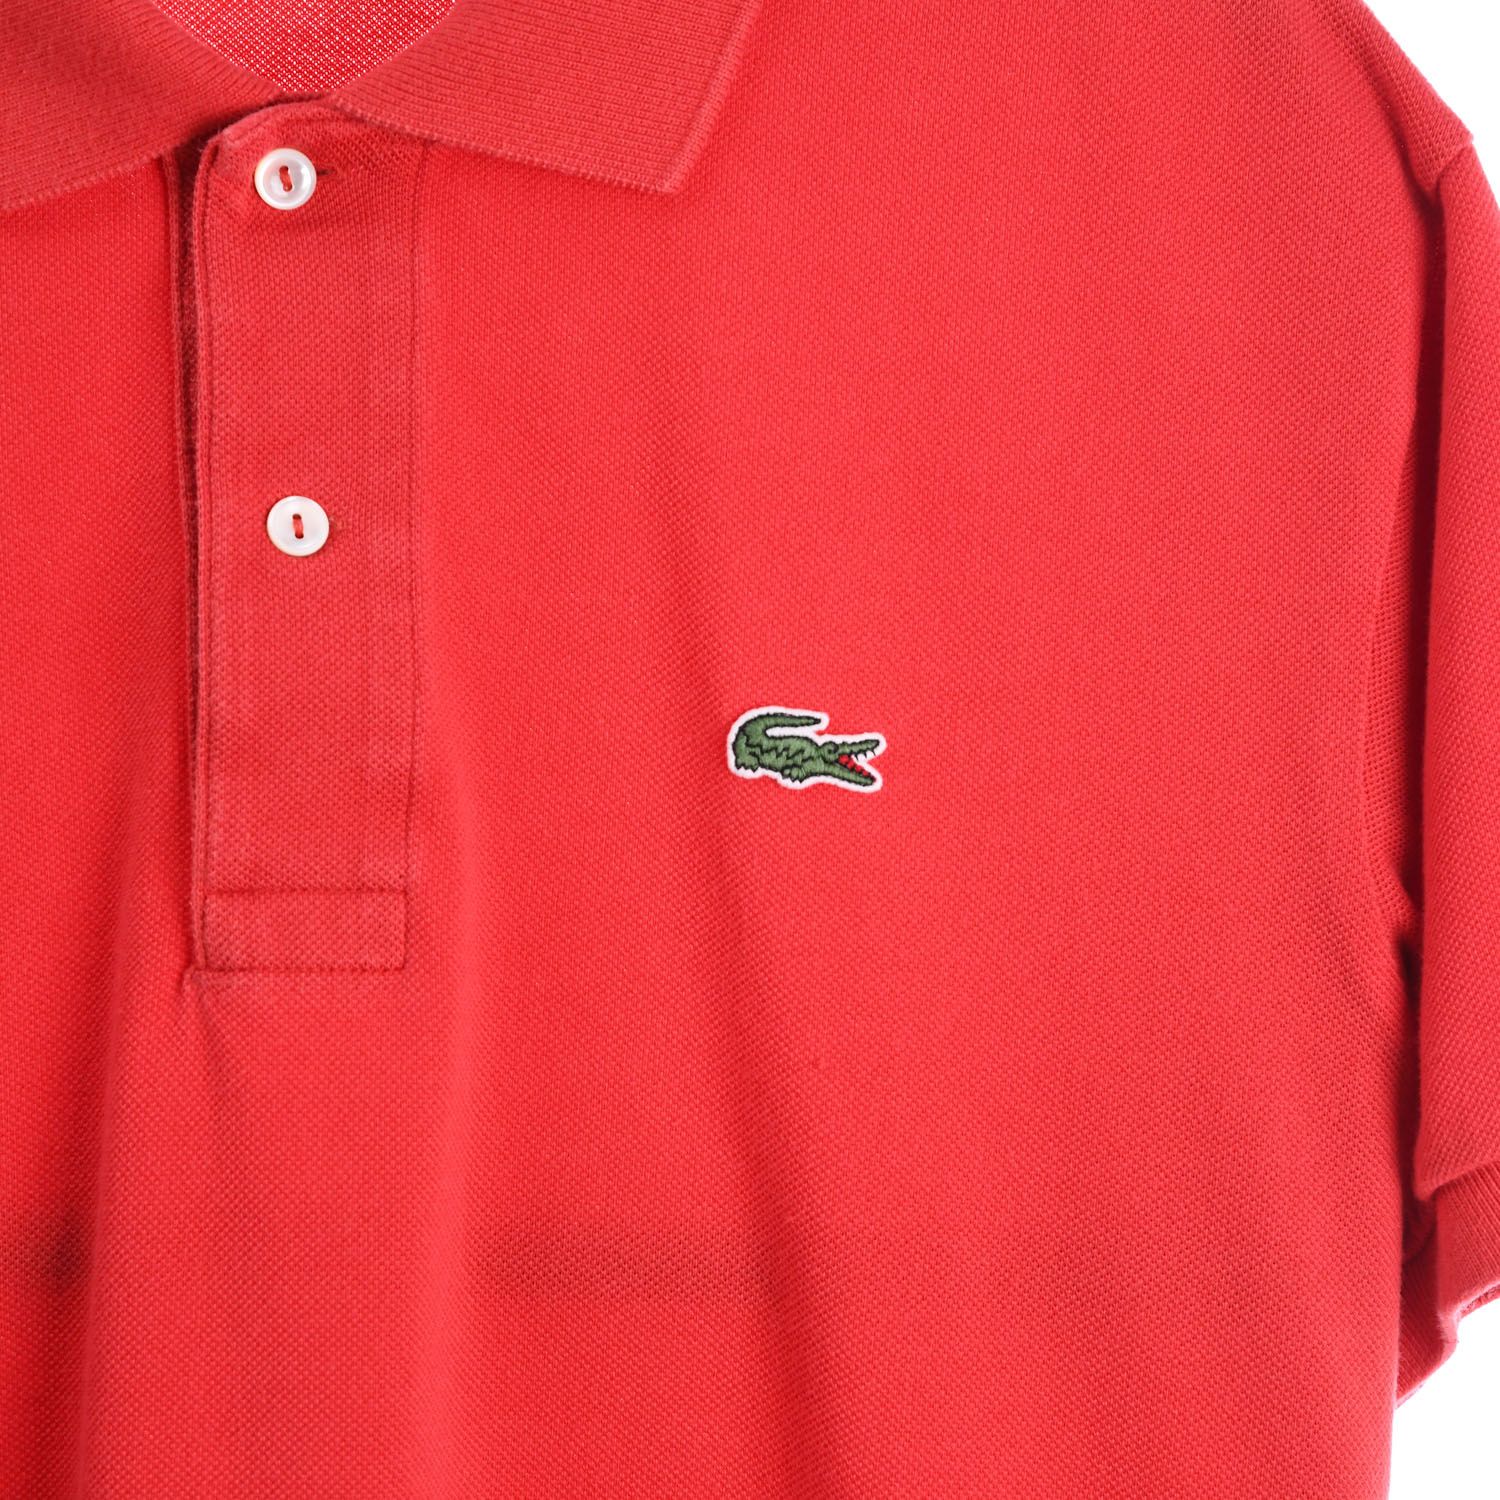 Lacoste Polo Red Shirt